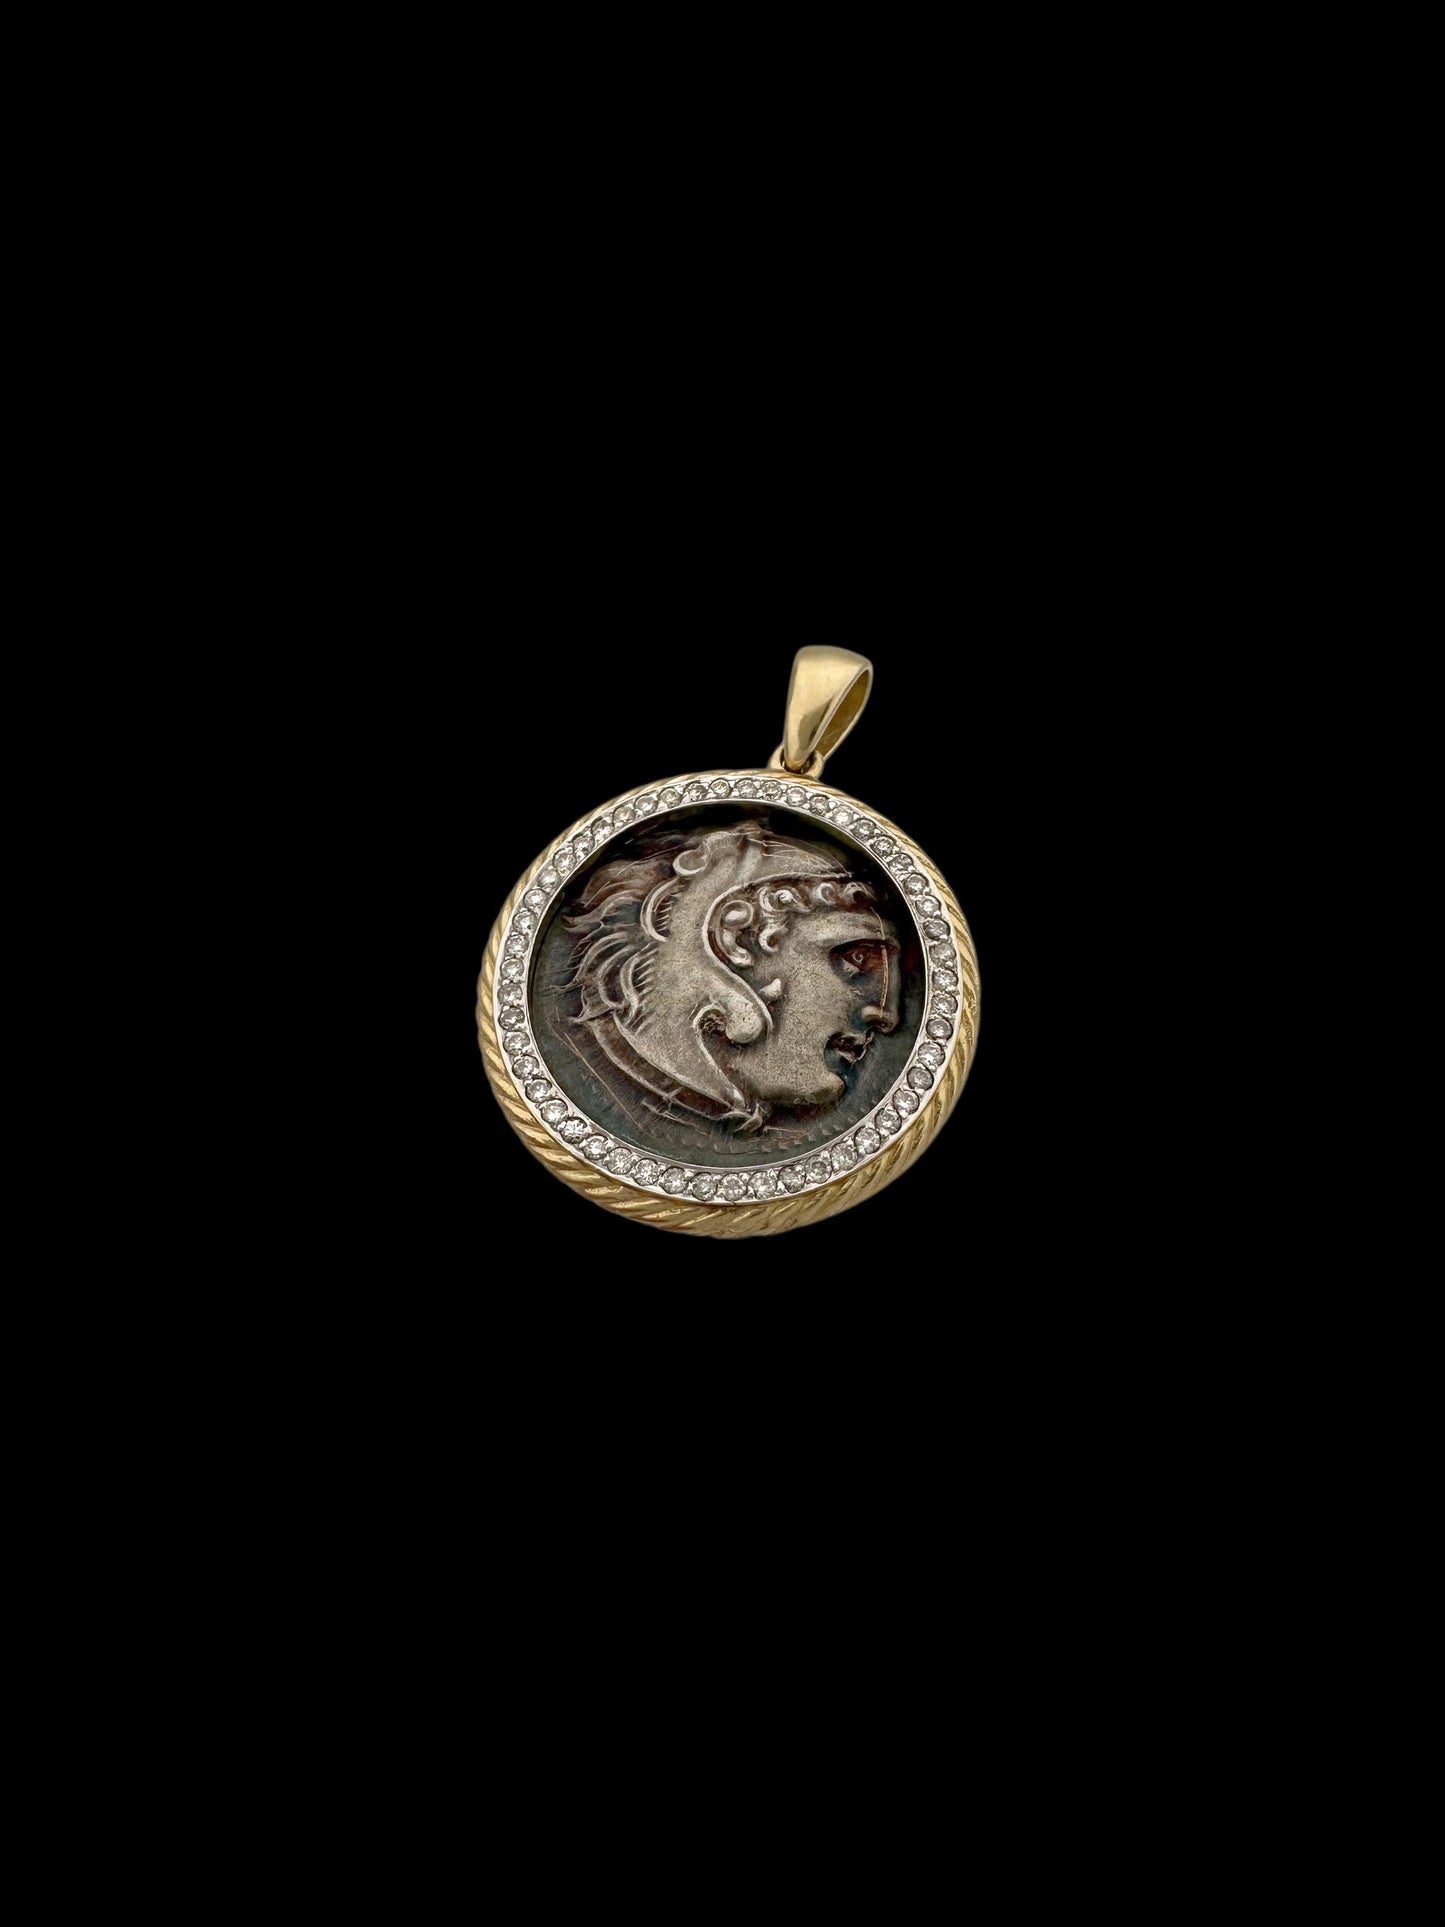 Ancient Alexander the Great Coin Set in 14K Gold & Diamond Pendant